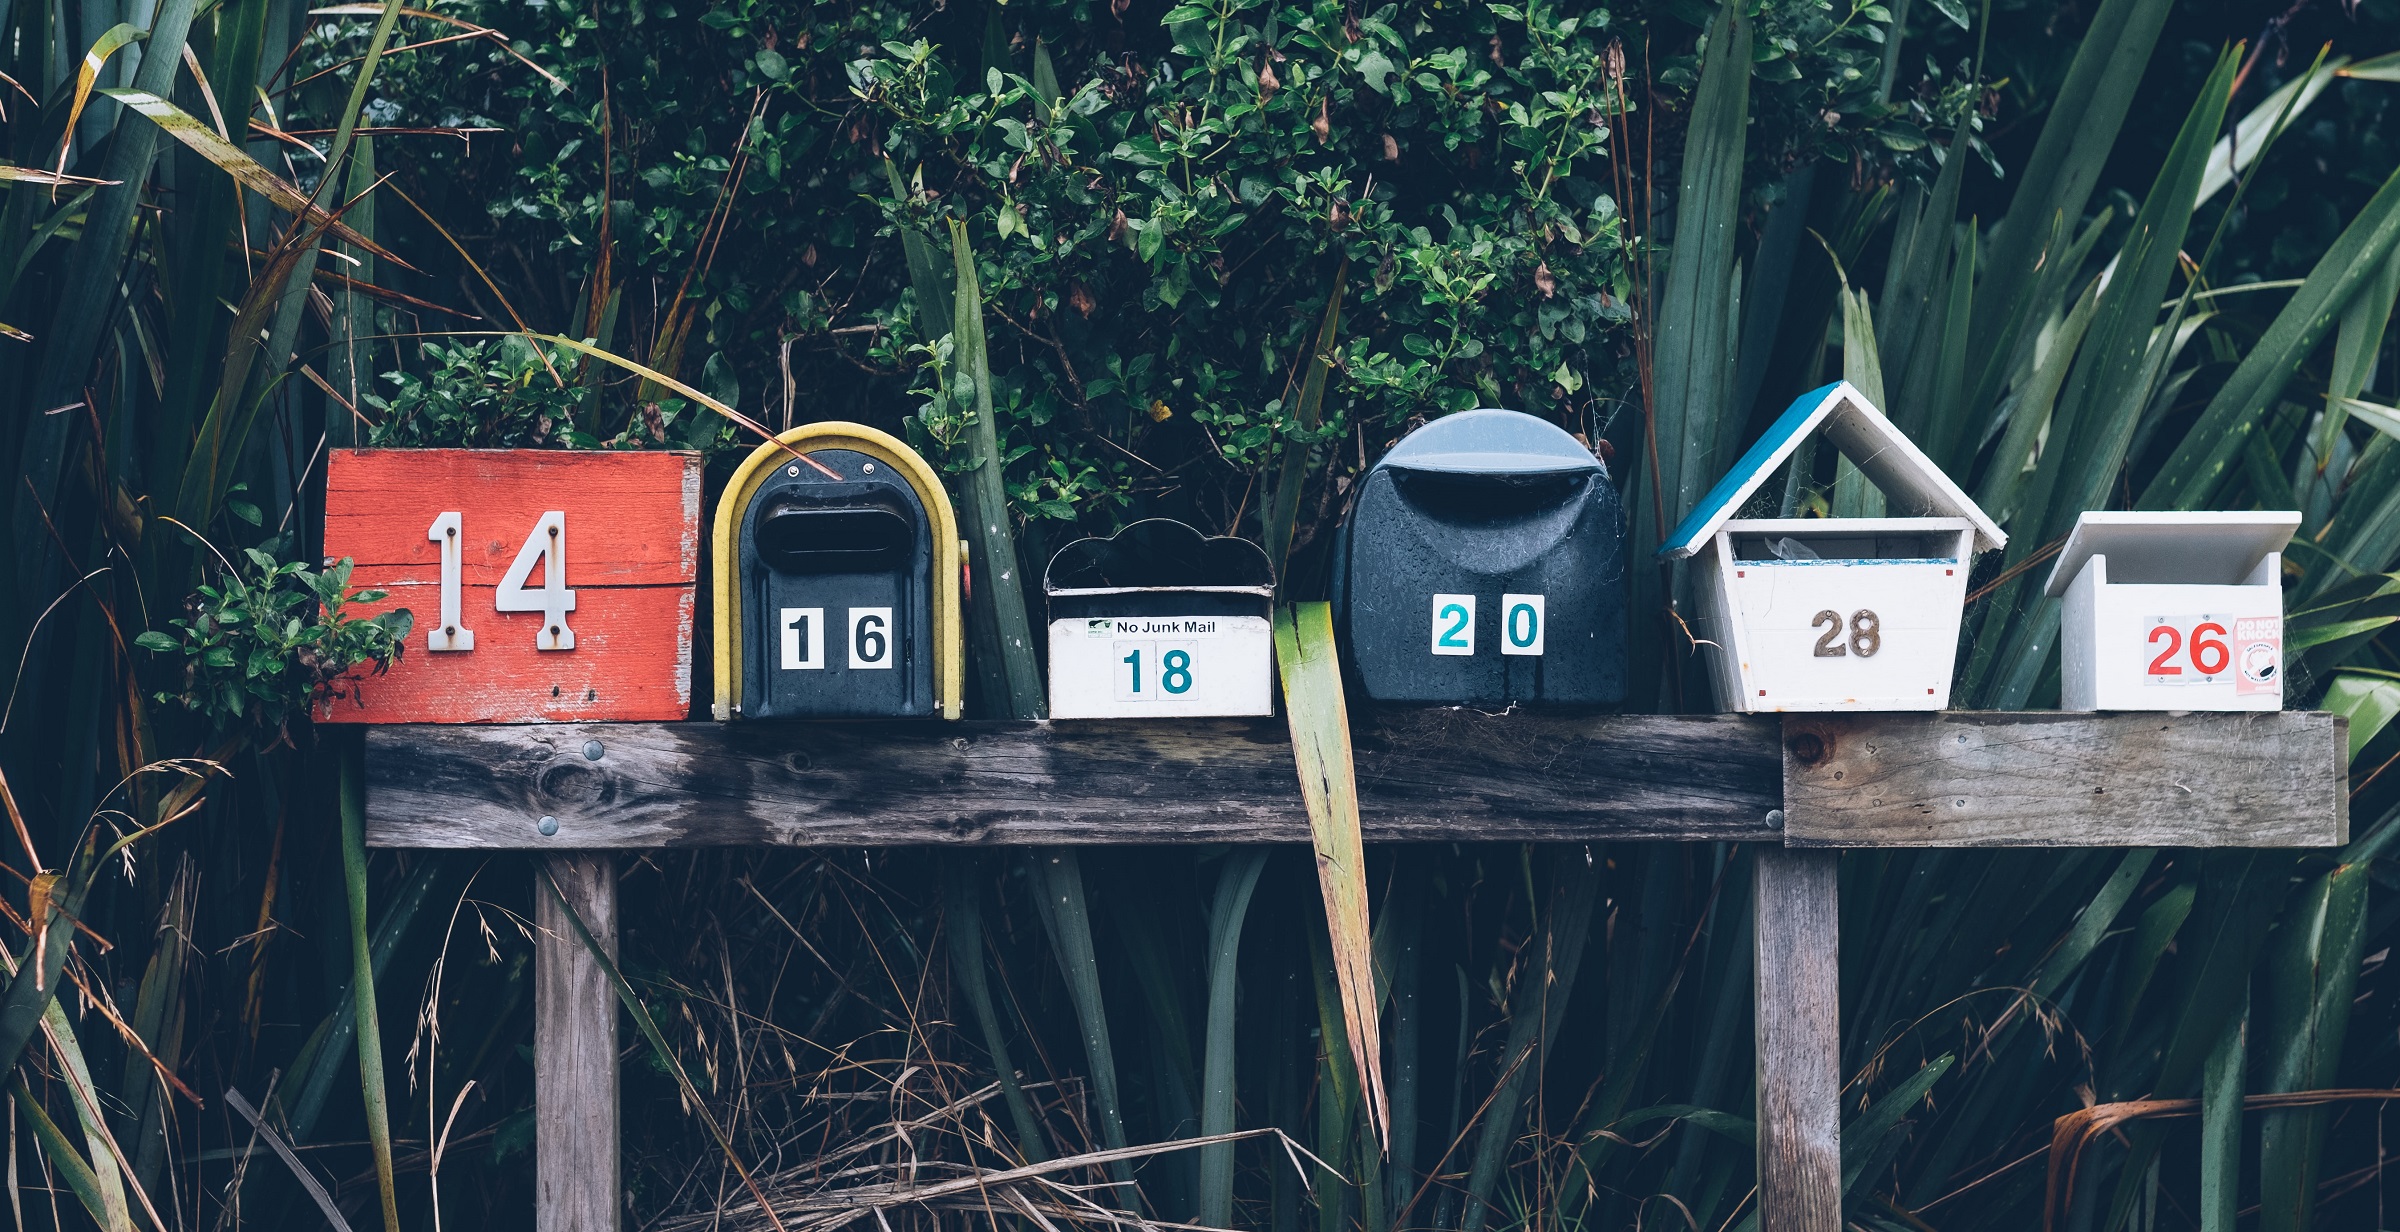 Colorful row of mailboxes in front of lush greenery